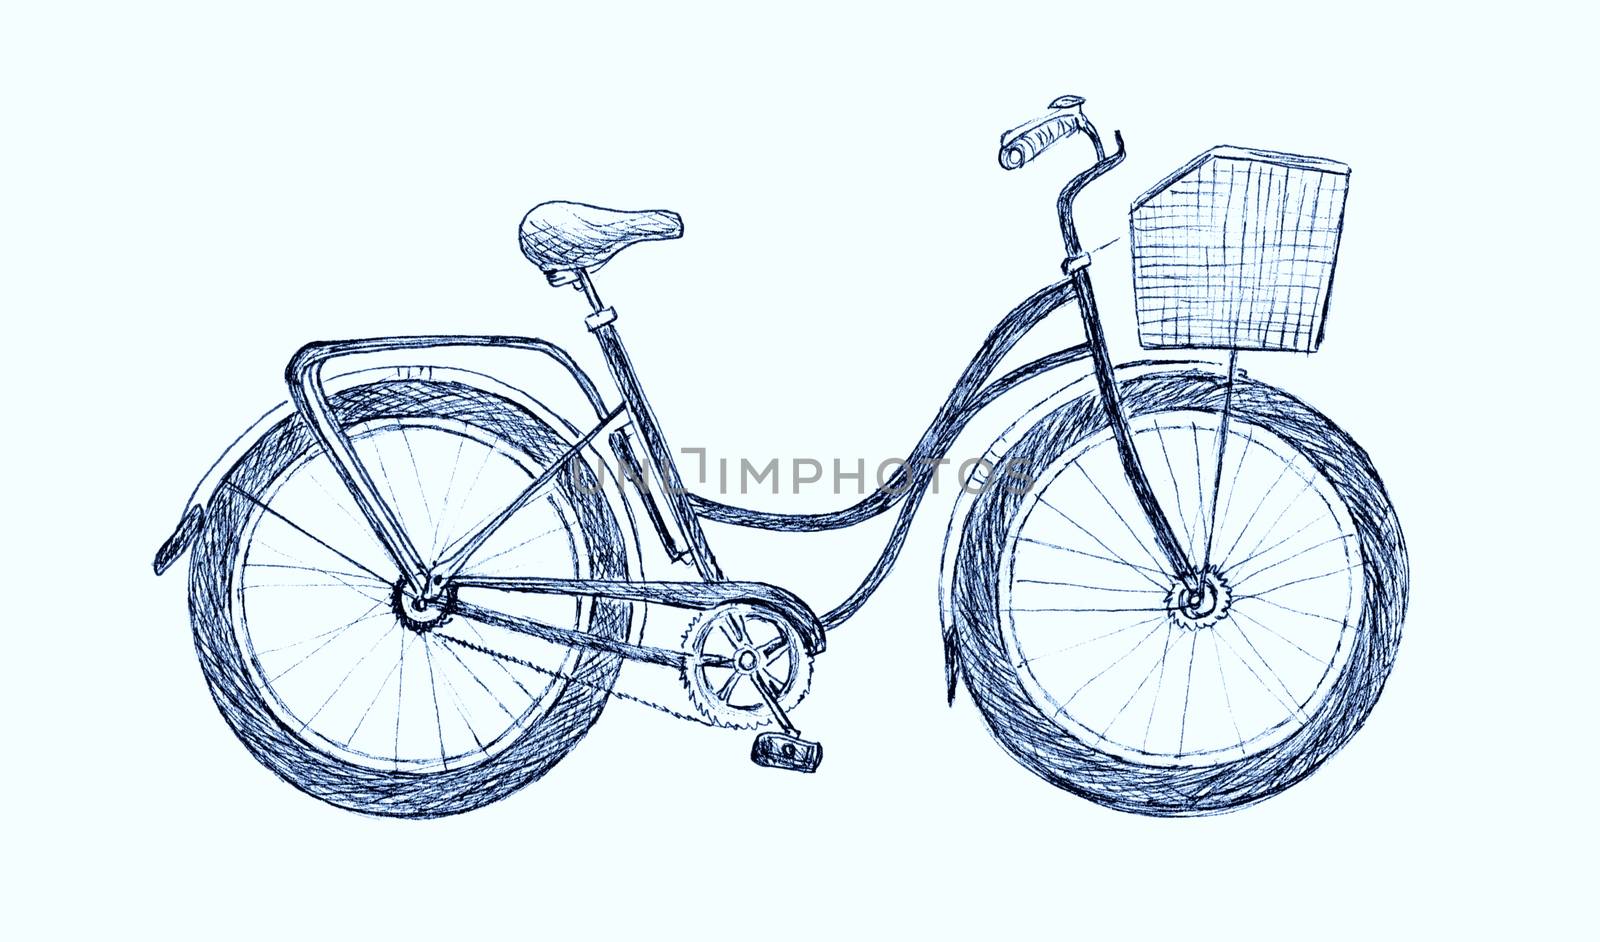 Vintage road bicycle hand drawn illustration. Eco transport sketch isolated on light background